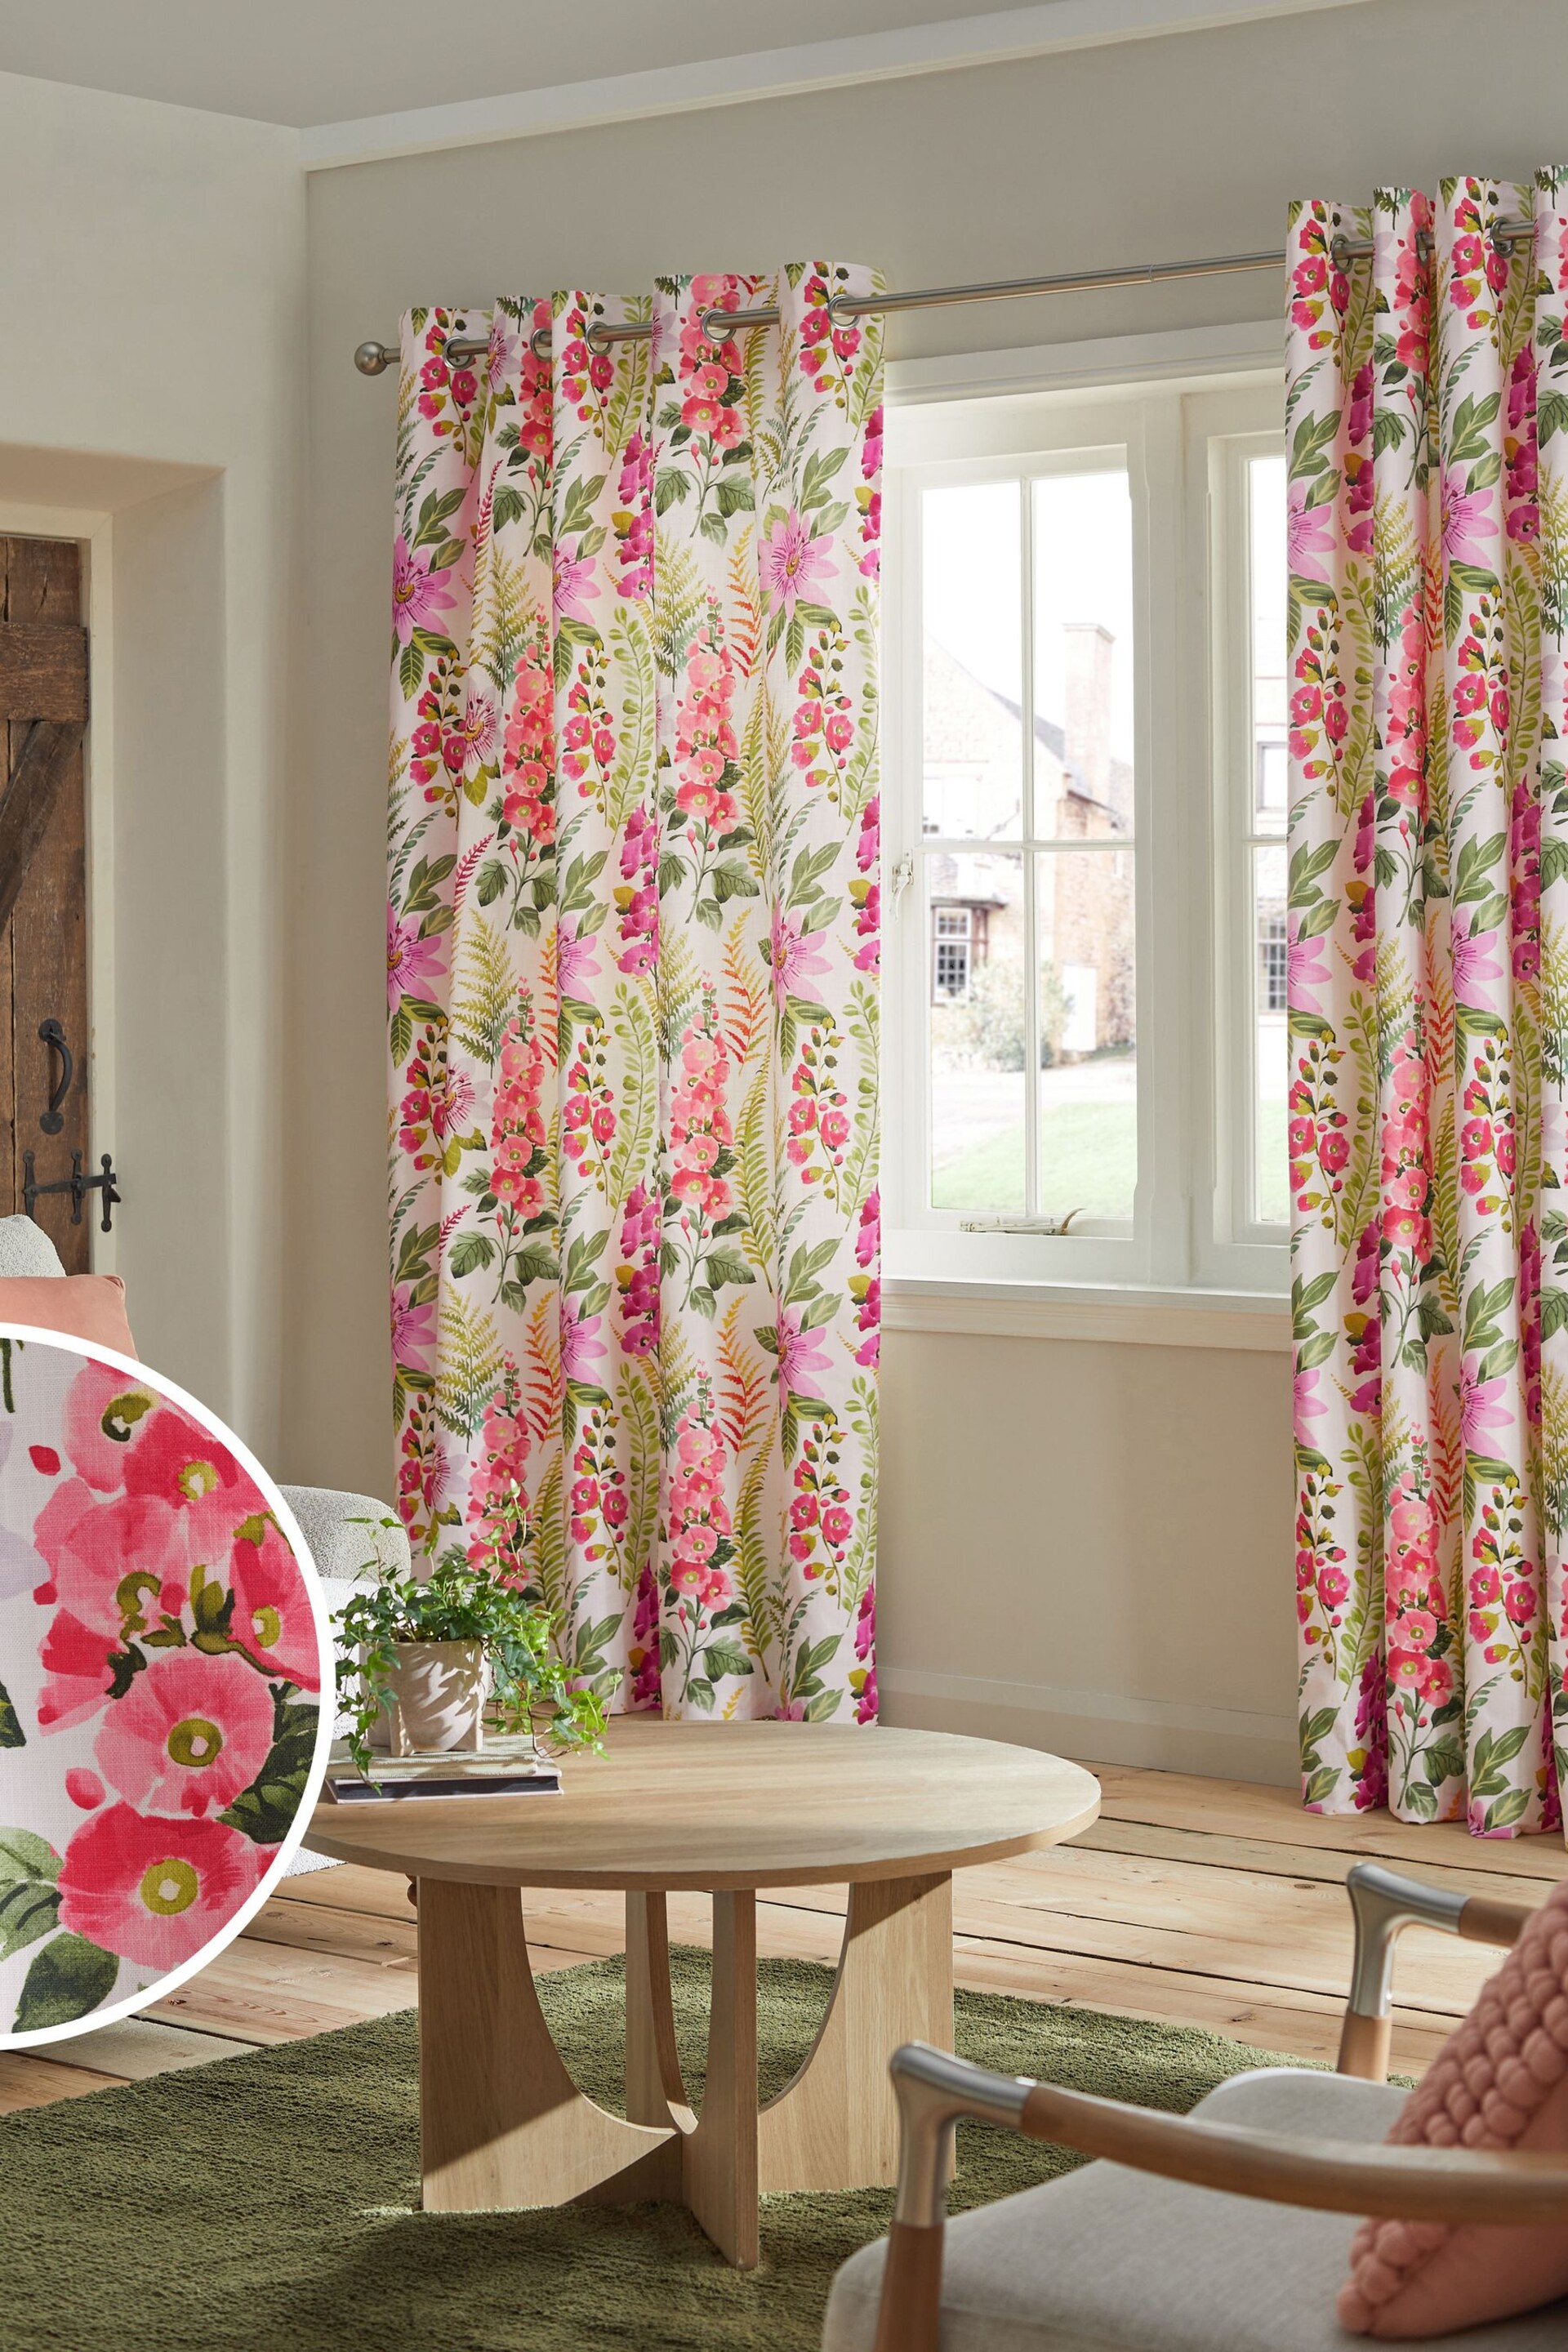 Pink/Green Floral 100% Cotton Eyelet Lined Curtains - Image 1 of 5